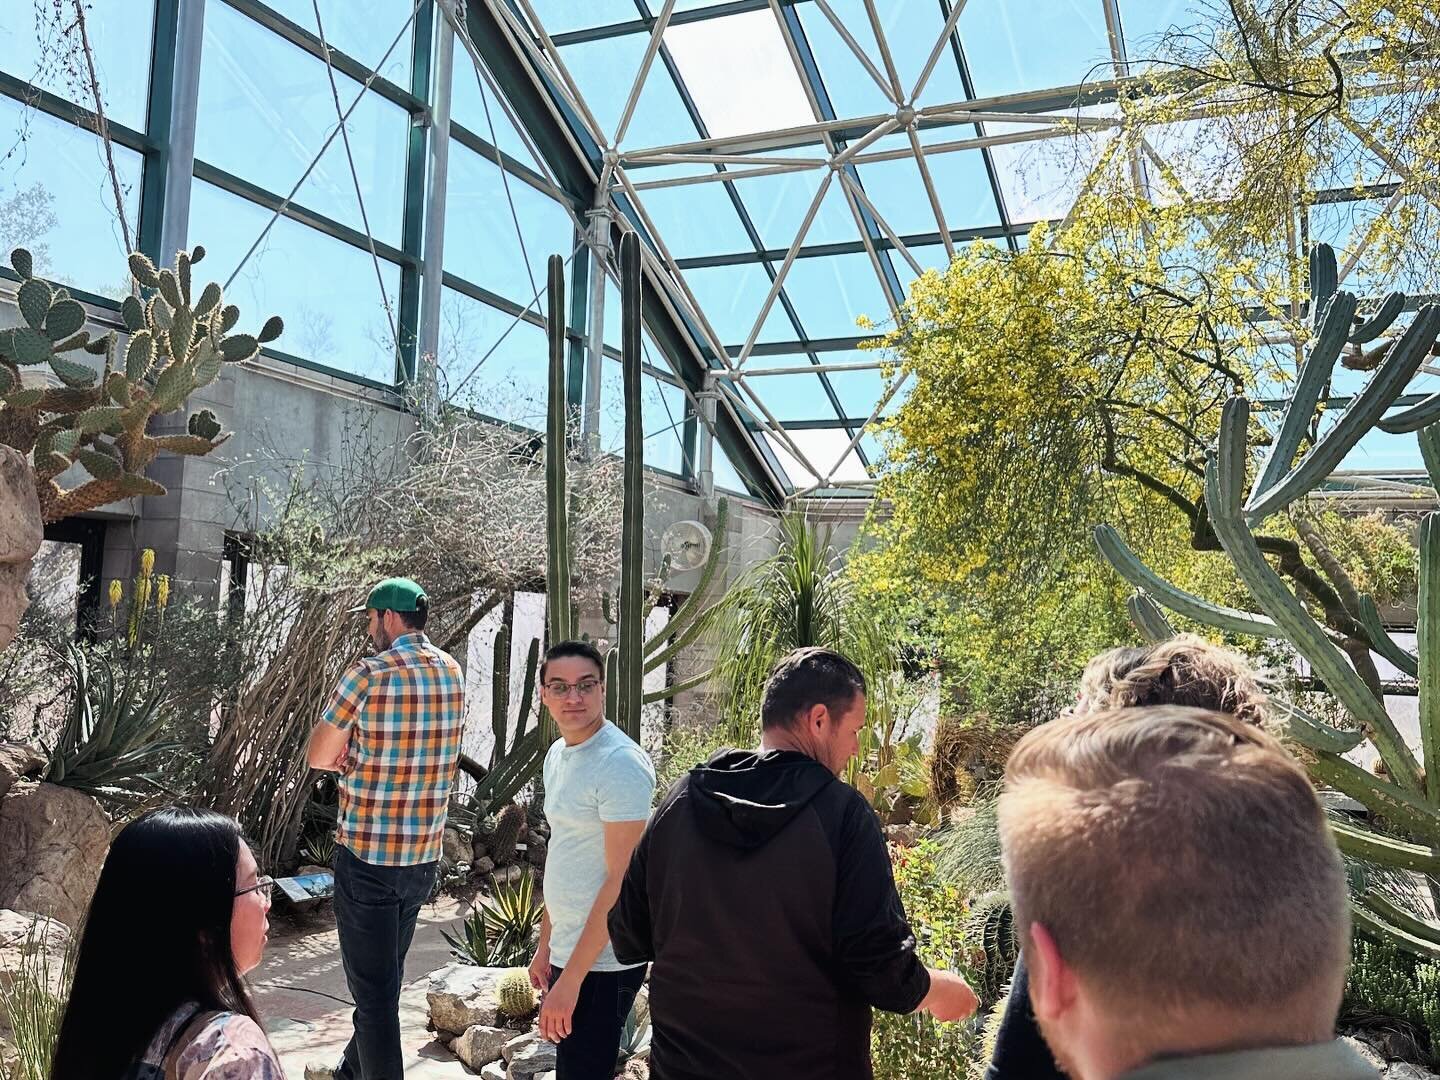 On Friday the team took a quick field trip over to the @abqbiopark to check out an interesting project that @consensus_planning invited us to collaborate on. The new performance space will be larger and provide views to the existing wetland. The syst